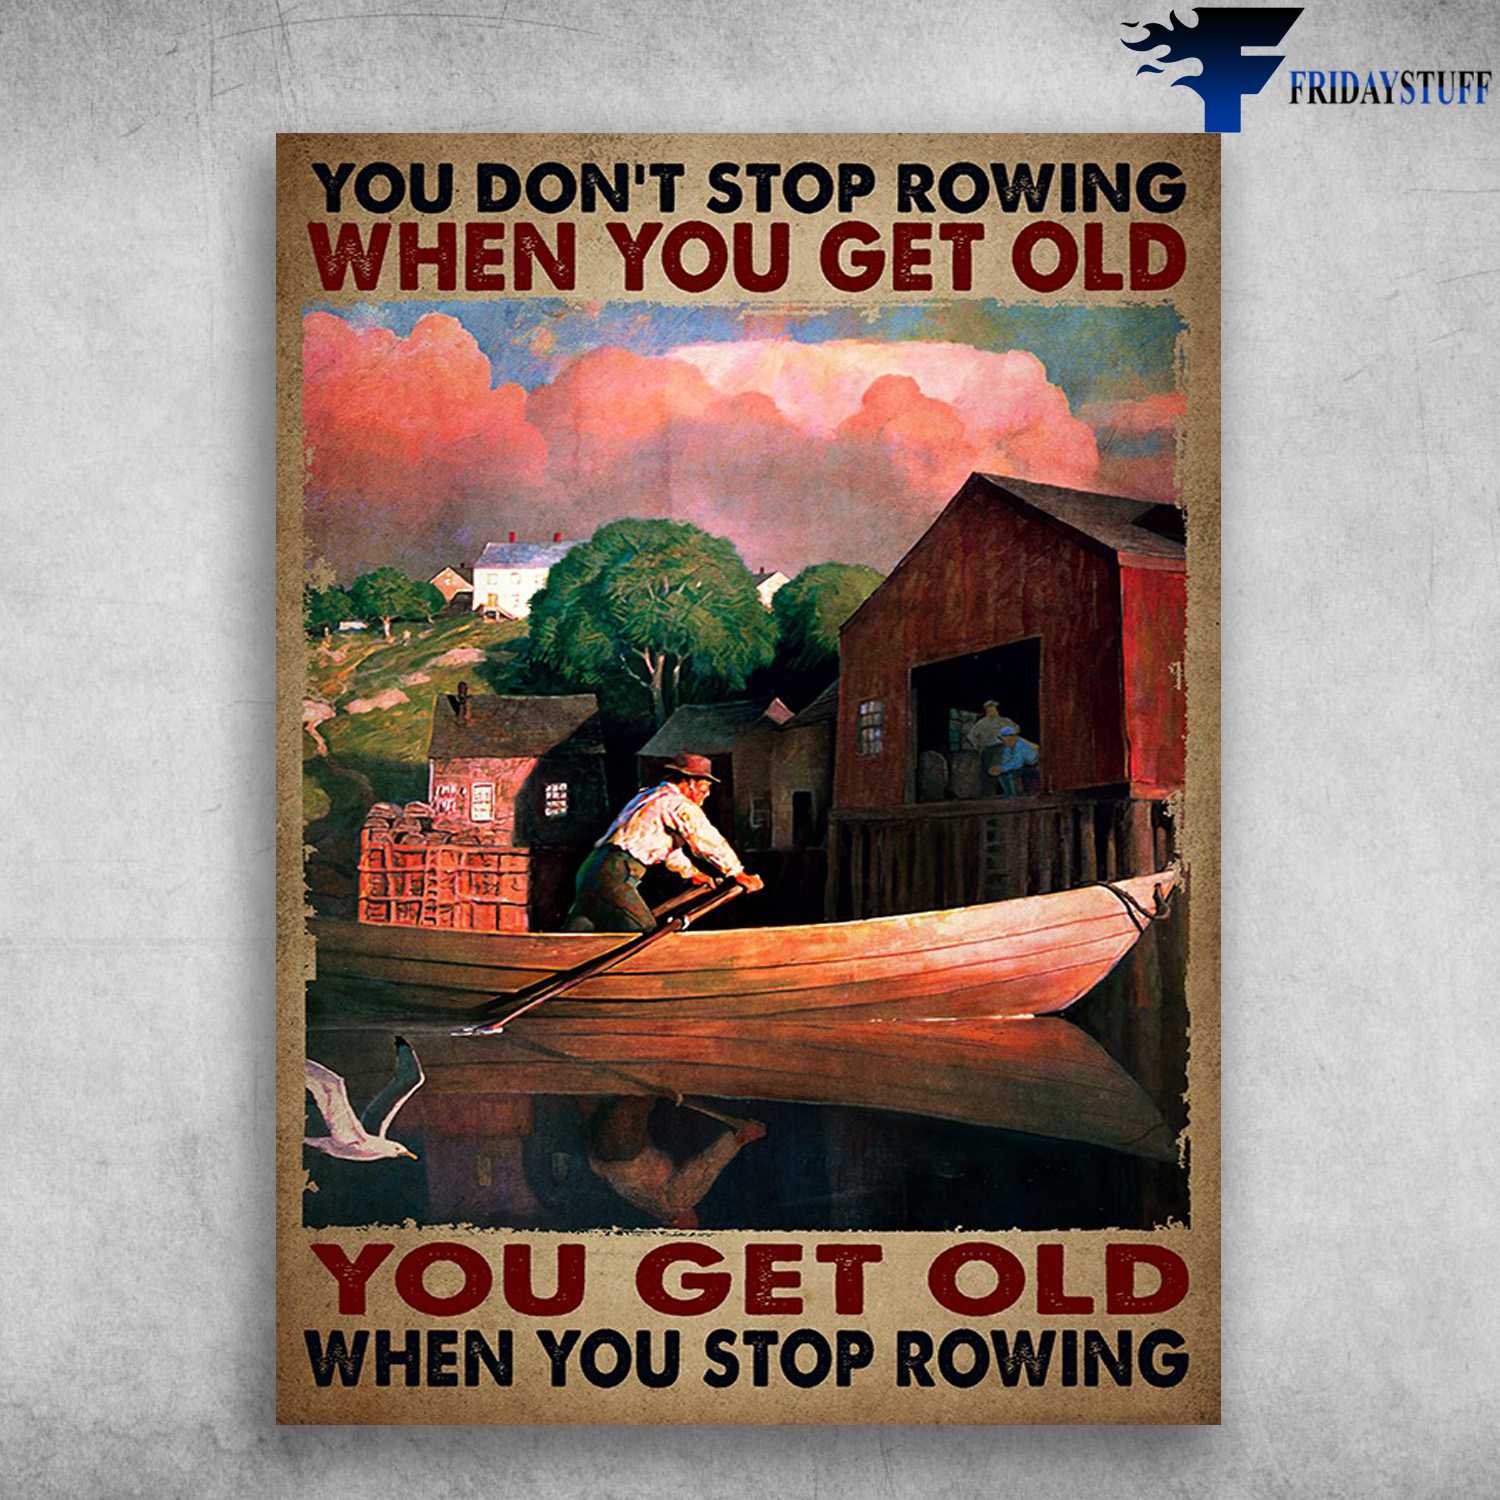 Rowing Man - You Don't Stop Rowing When You Get Old, You Get Old When You Stop Rowing